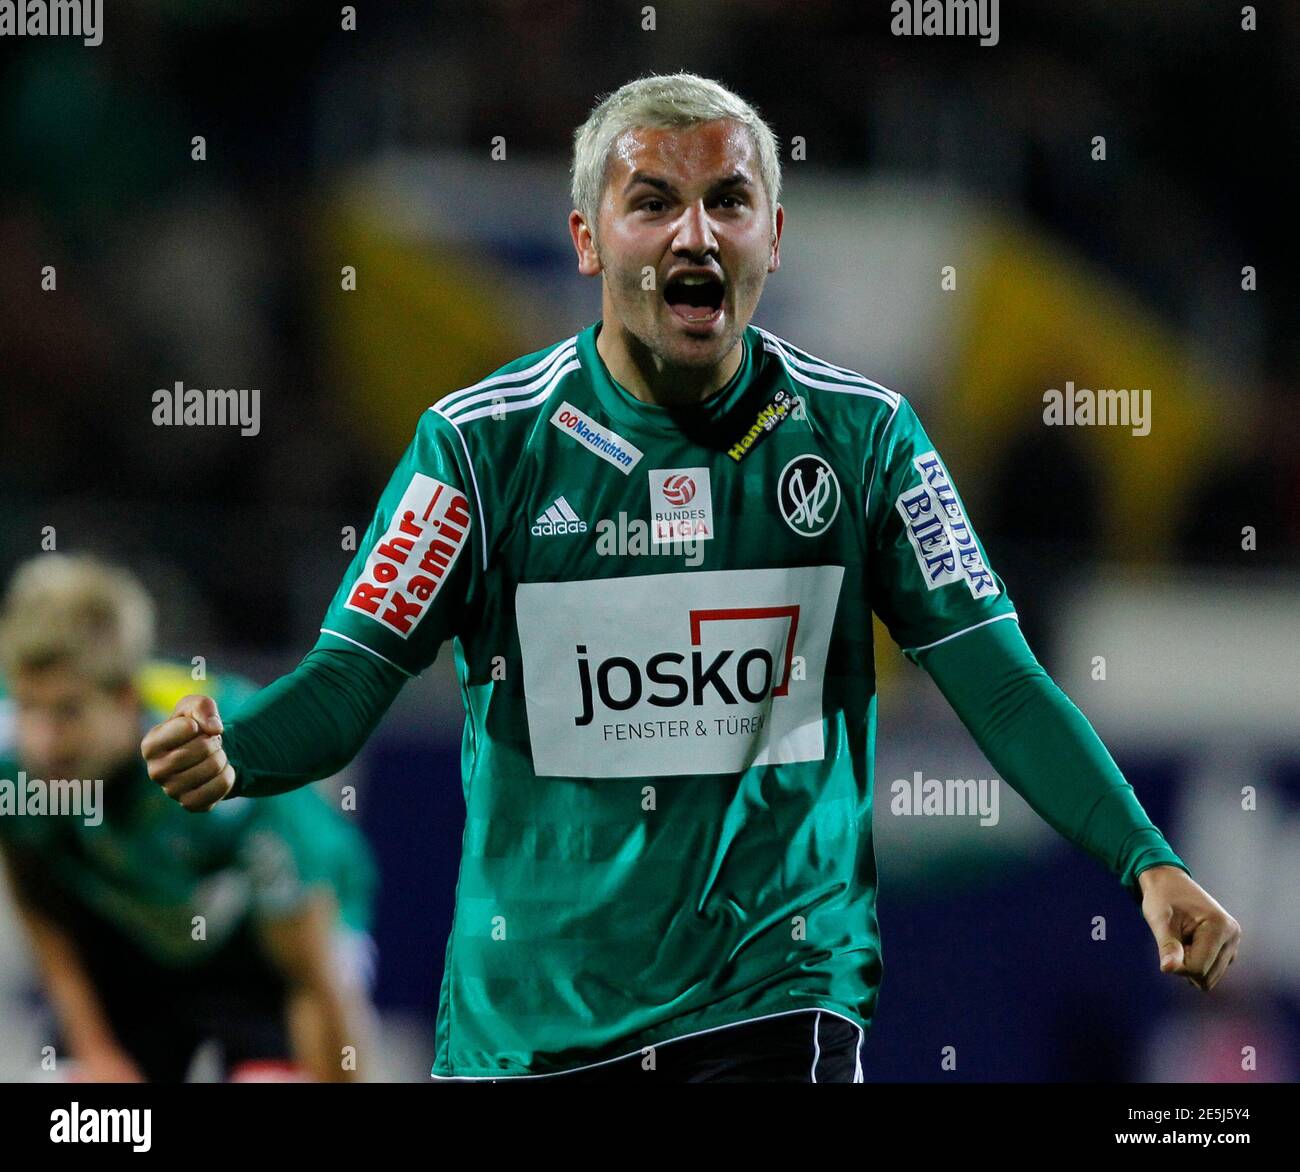 Ried's Anel Hadzic reacts after scoring a goal during their Austrian league  soccer match in Ried October 15, 2011. REUTERS/Dominic Ebenbichler (AUSTRIA  - Tags: SPORT SOCCER Stock Photo - Alamy